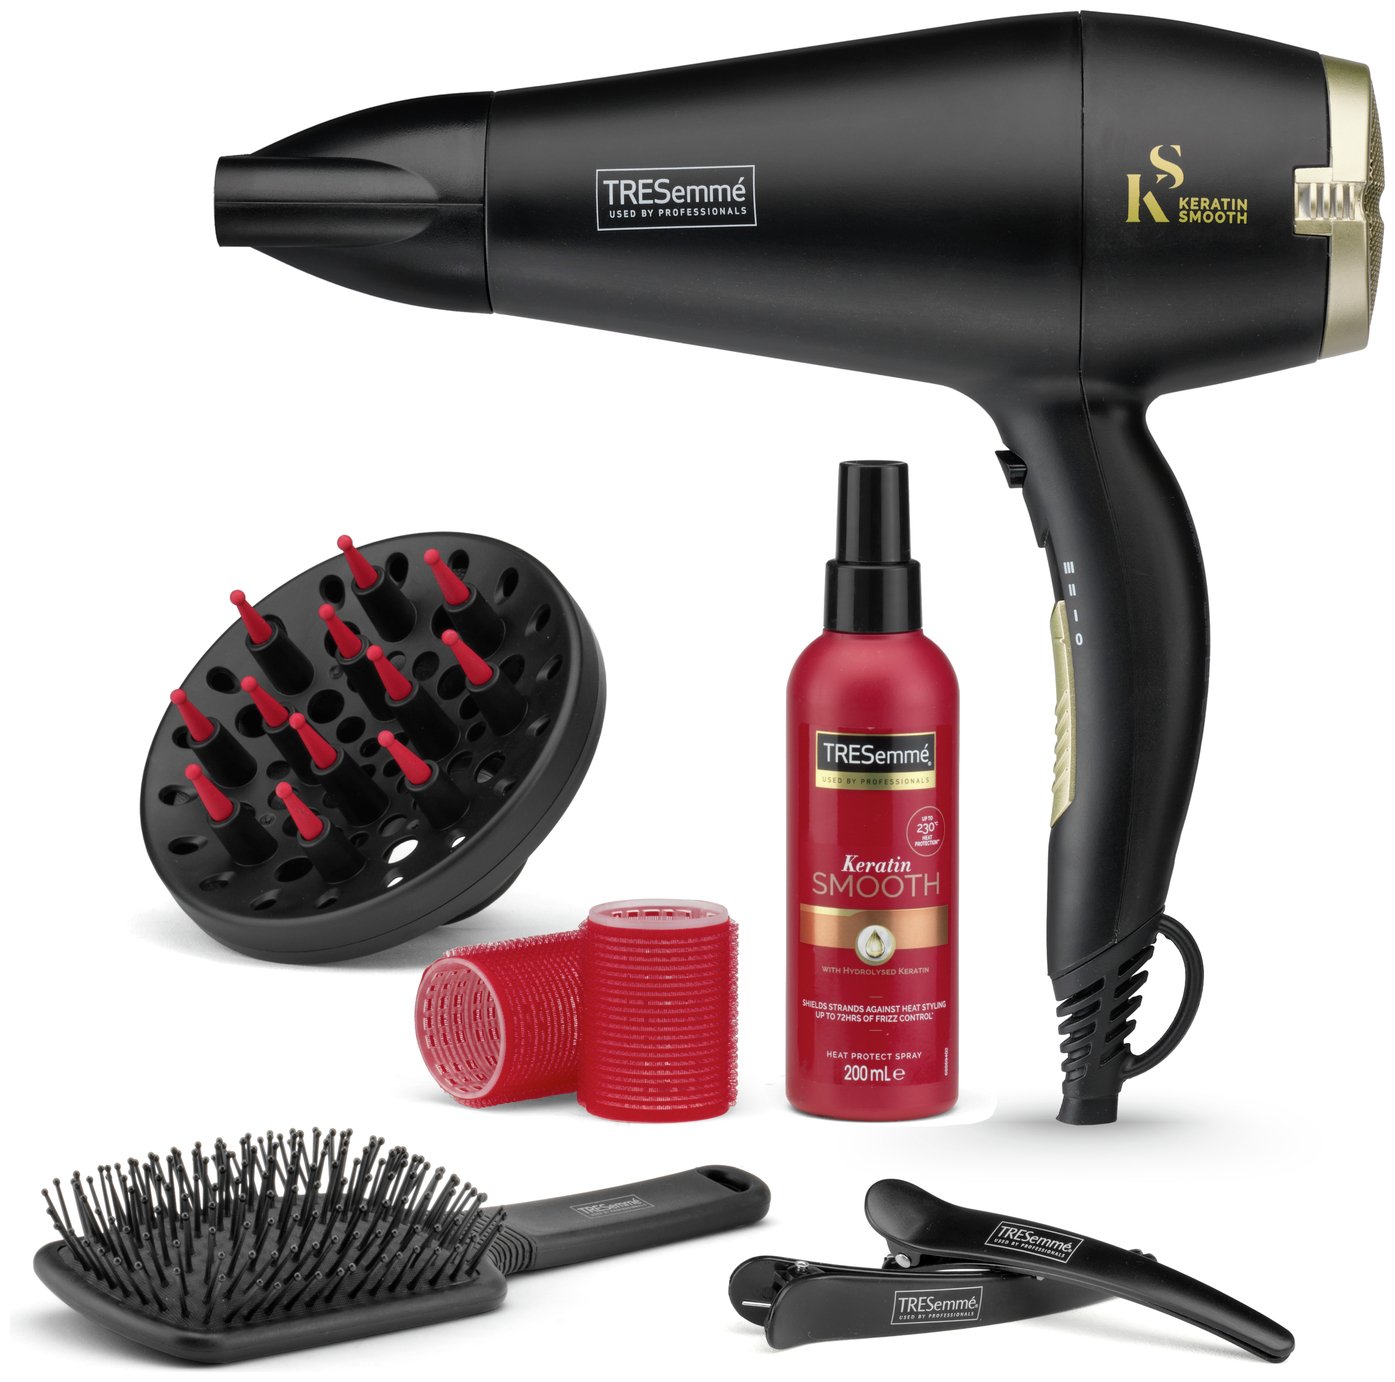 TRESemme Keratin Smooth Blow Dry Hair Dryer Gift Set review